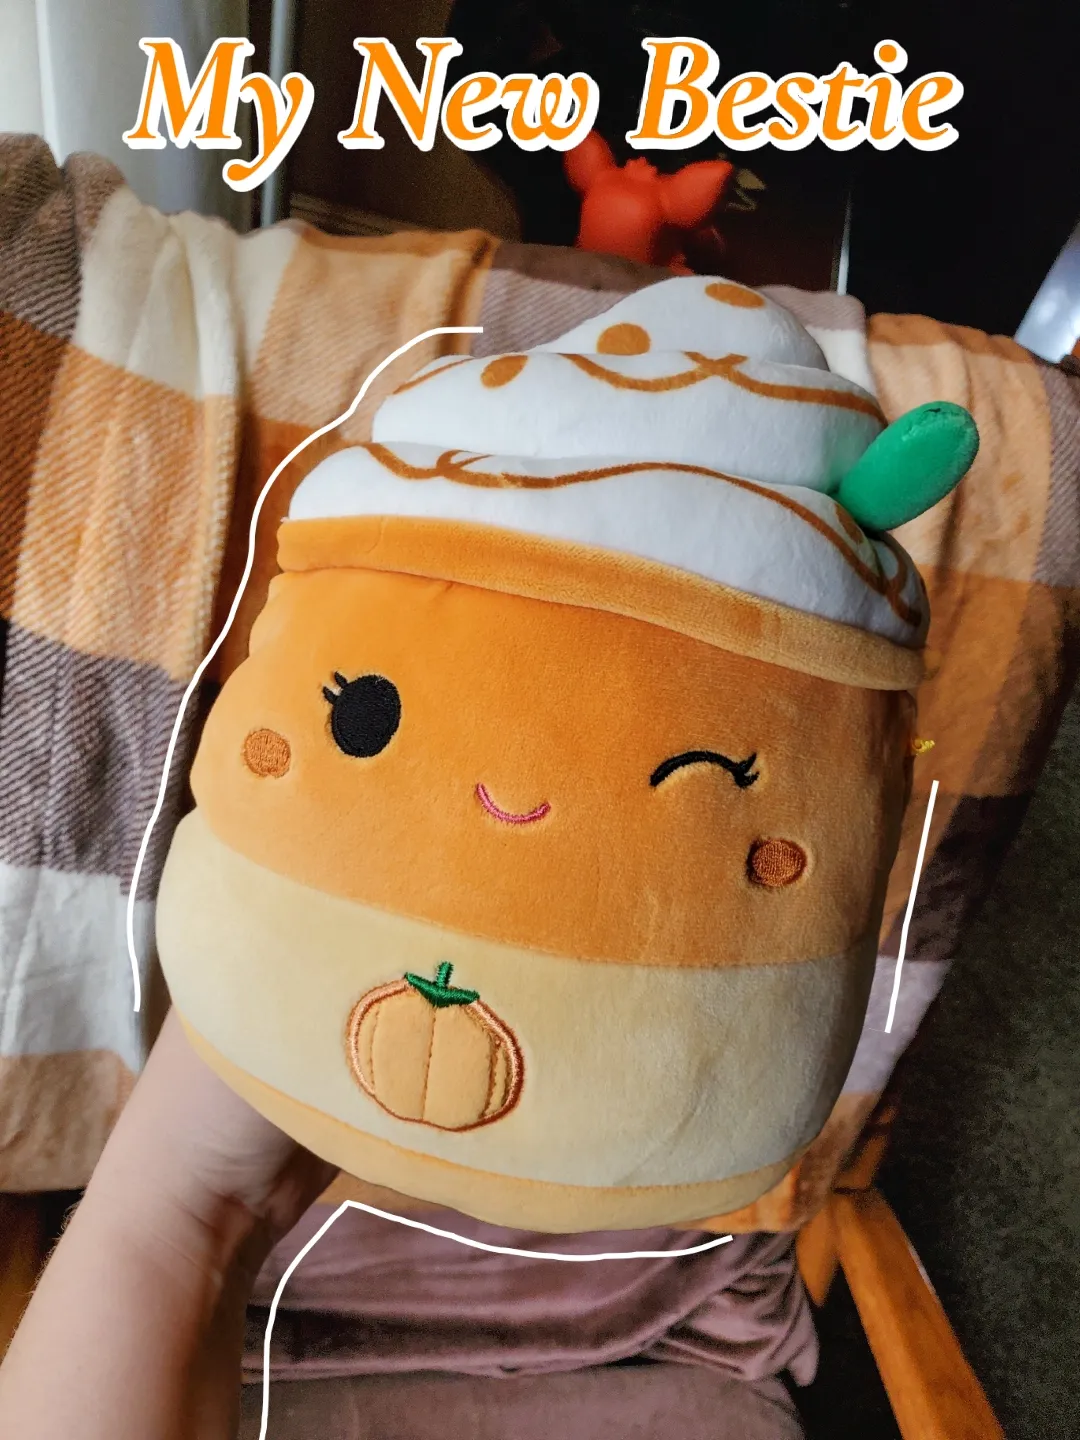 Hey hey hey! It's more Squishmallow news to feed your obsession!